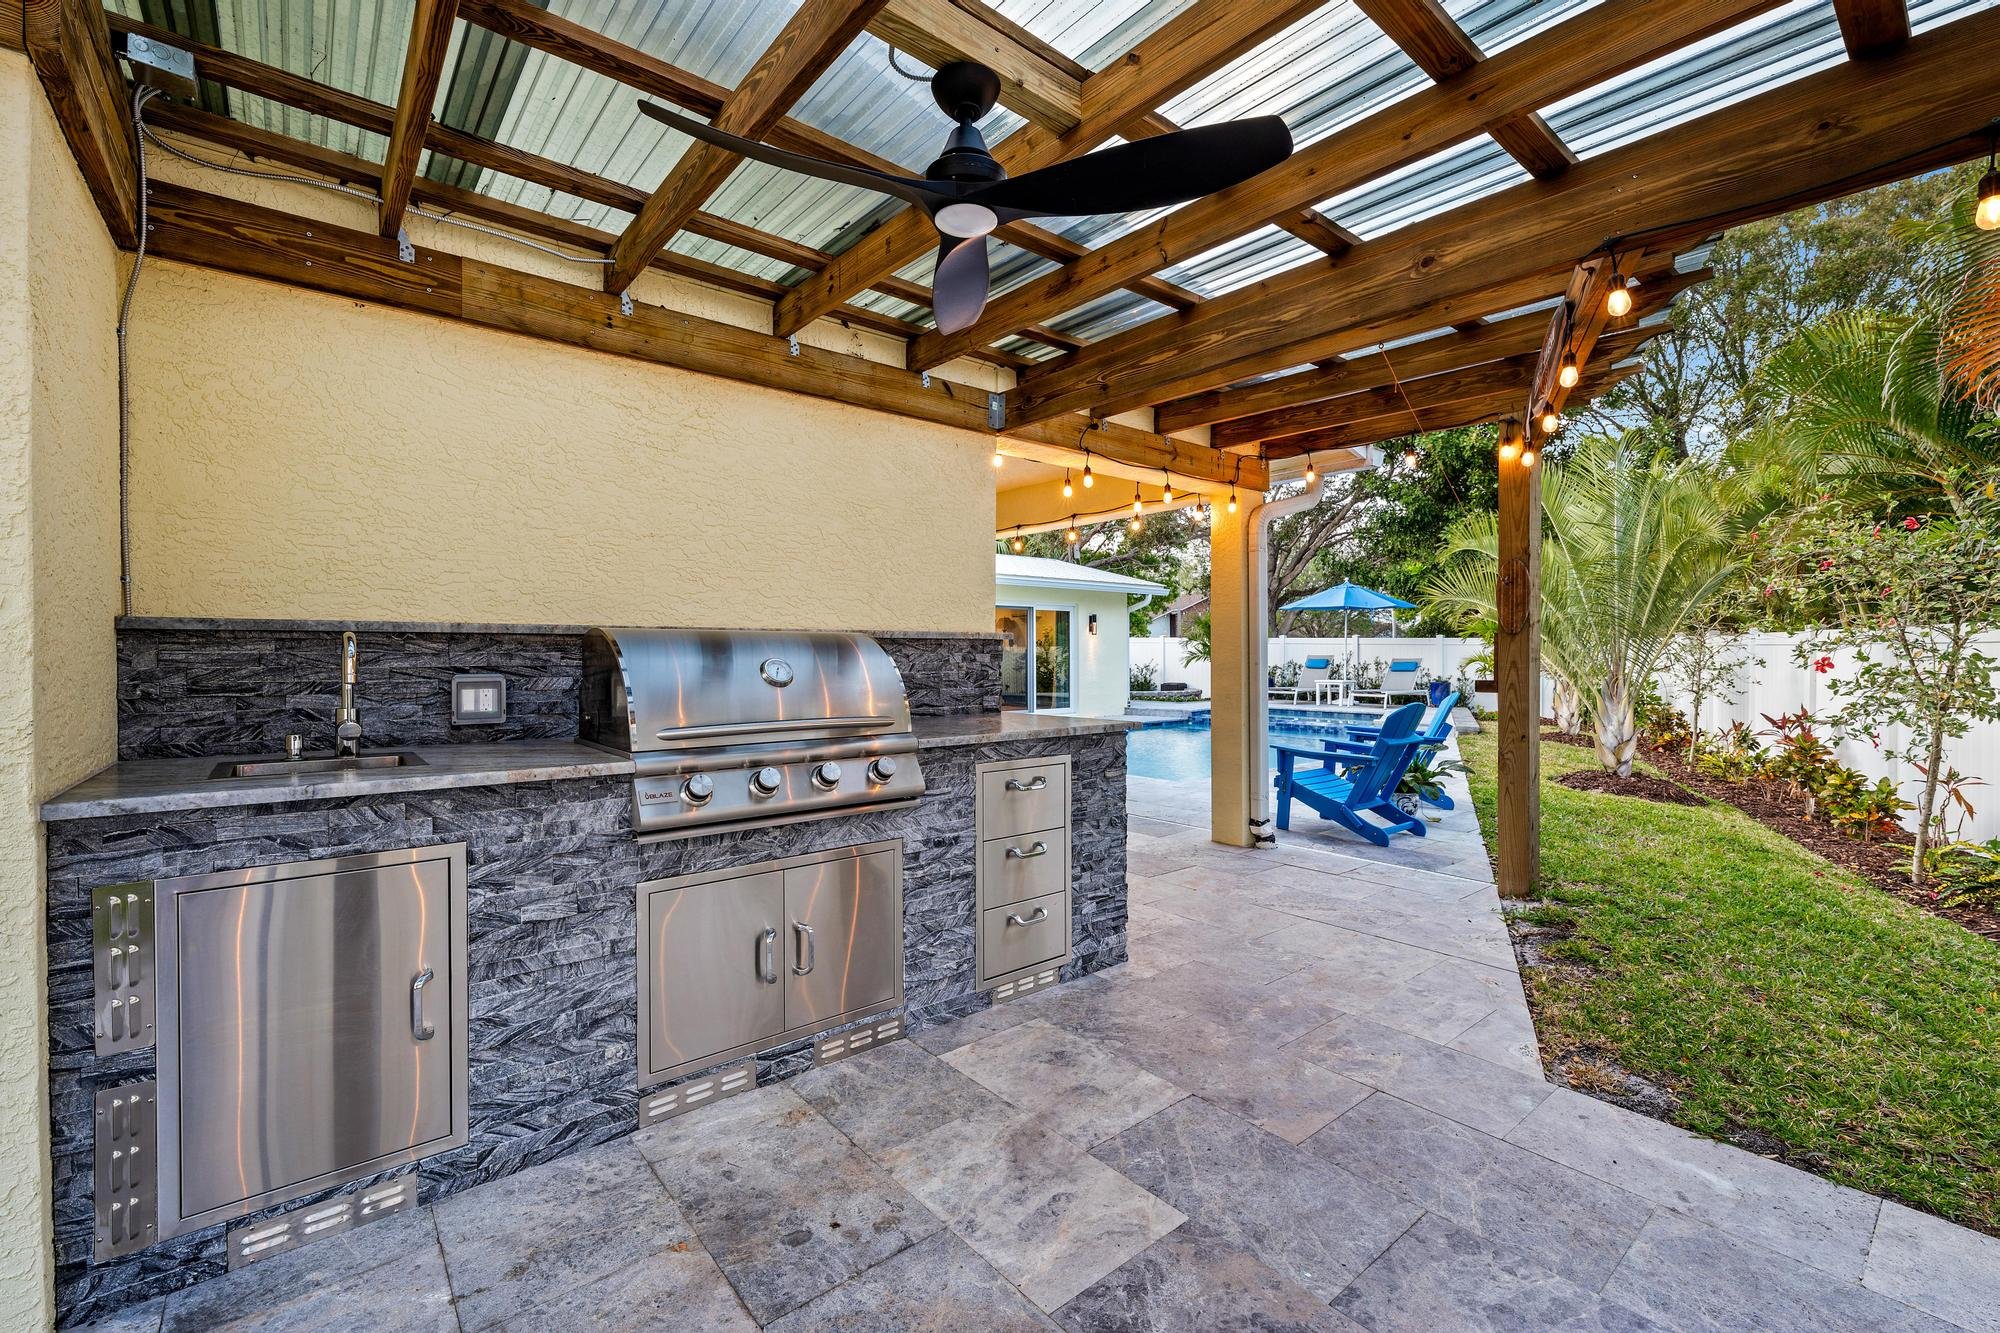 tequesta dreamy home for sale with outdoor ktichen pool 